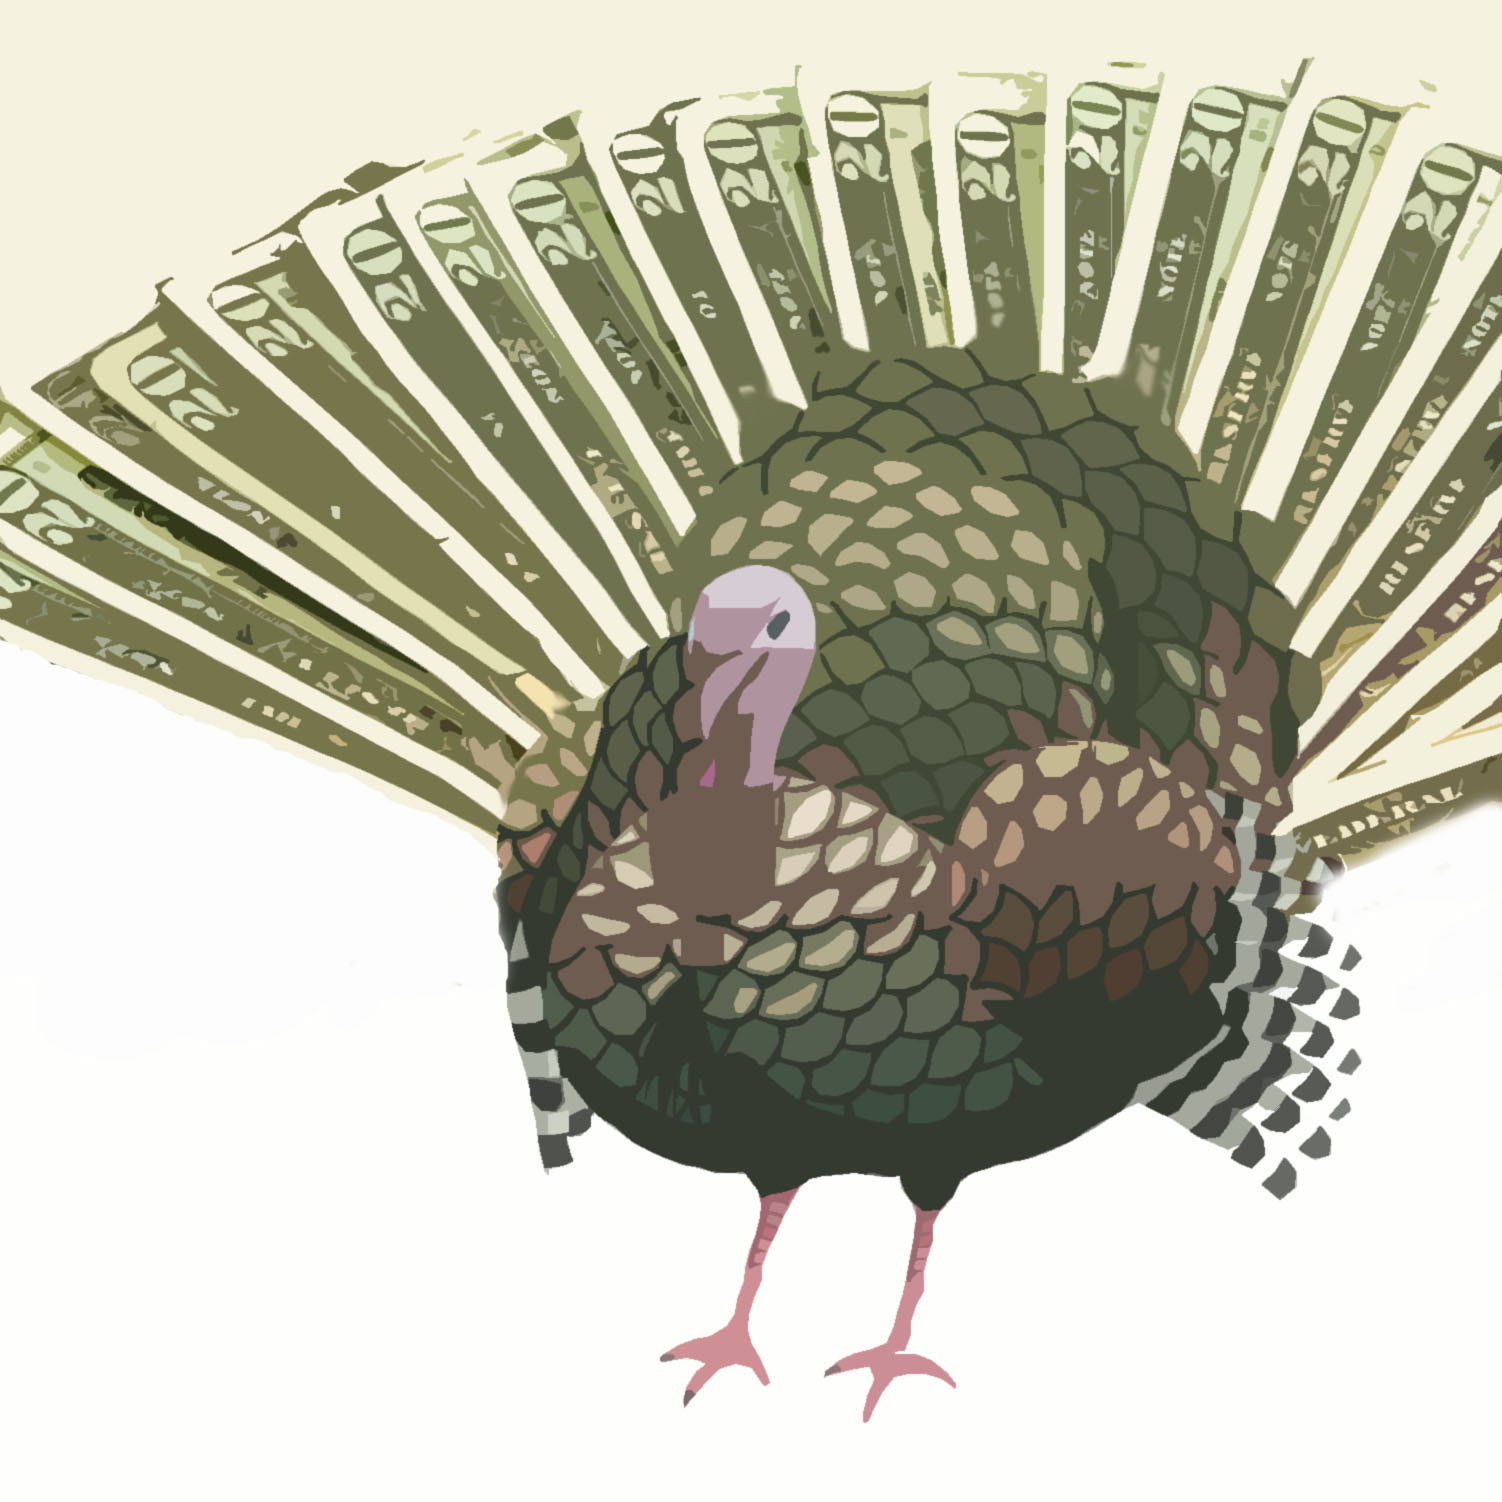 Illstrated Turkey with Twenty Dollar Bills for its tail feathers